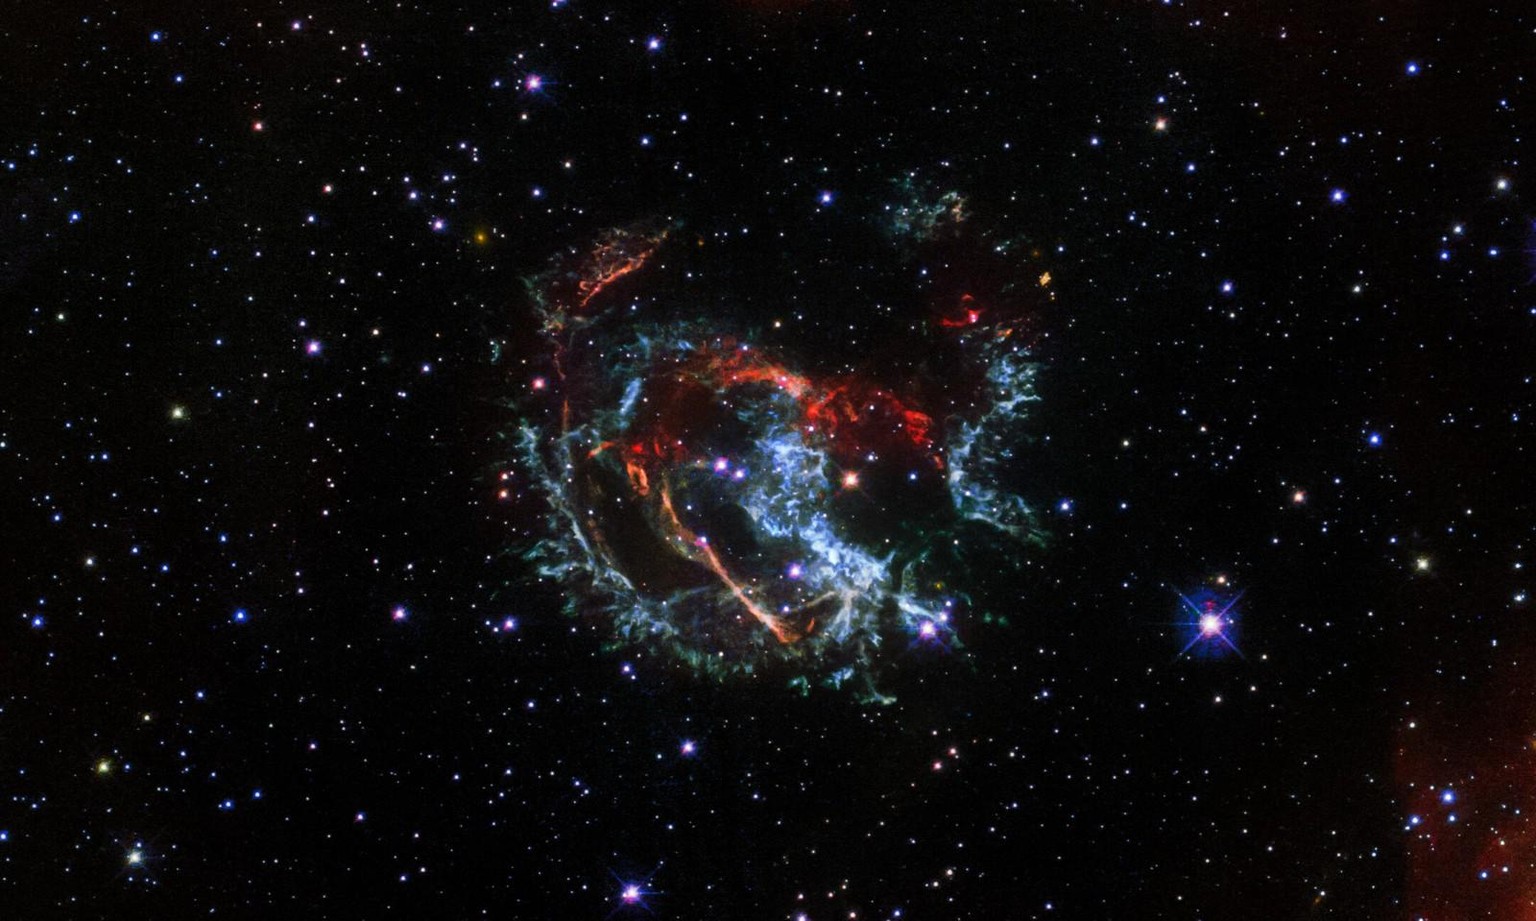 Featured in this Hubble image is an expanding, gaseous corpse — a supernova remnant — known as 1E 0102.2-7219. It is the remnant of a star that exploded long ago in the Small Magellanic Cloud, a satel ...